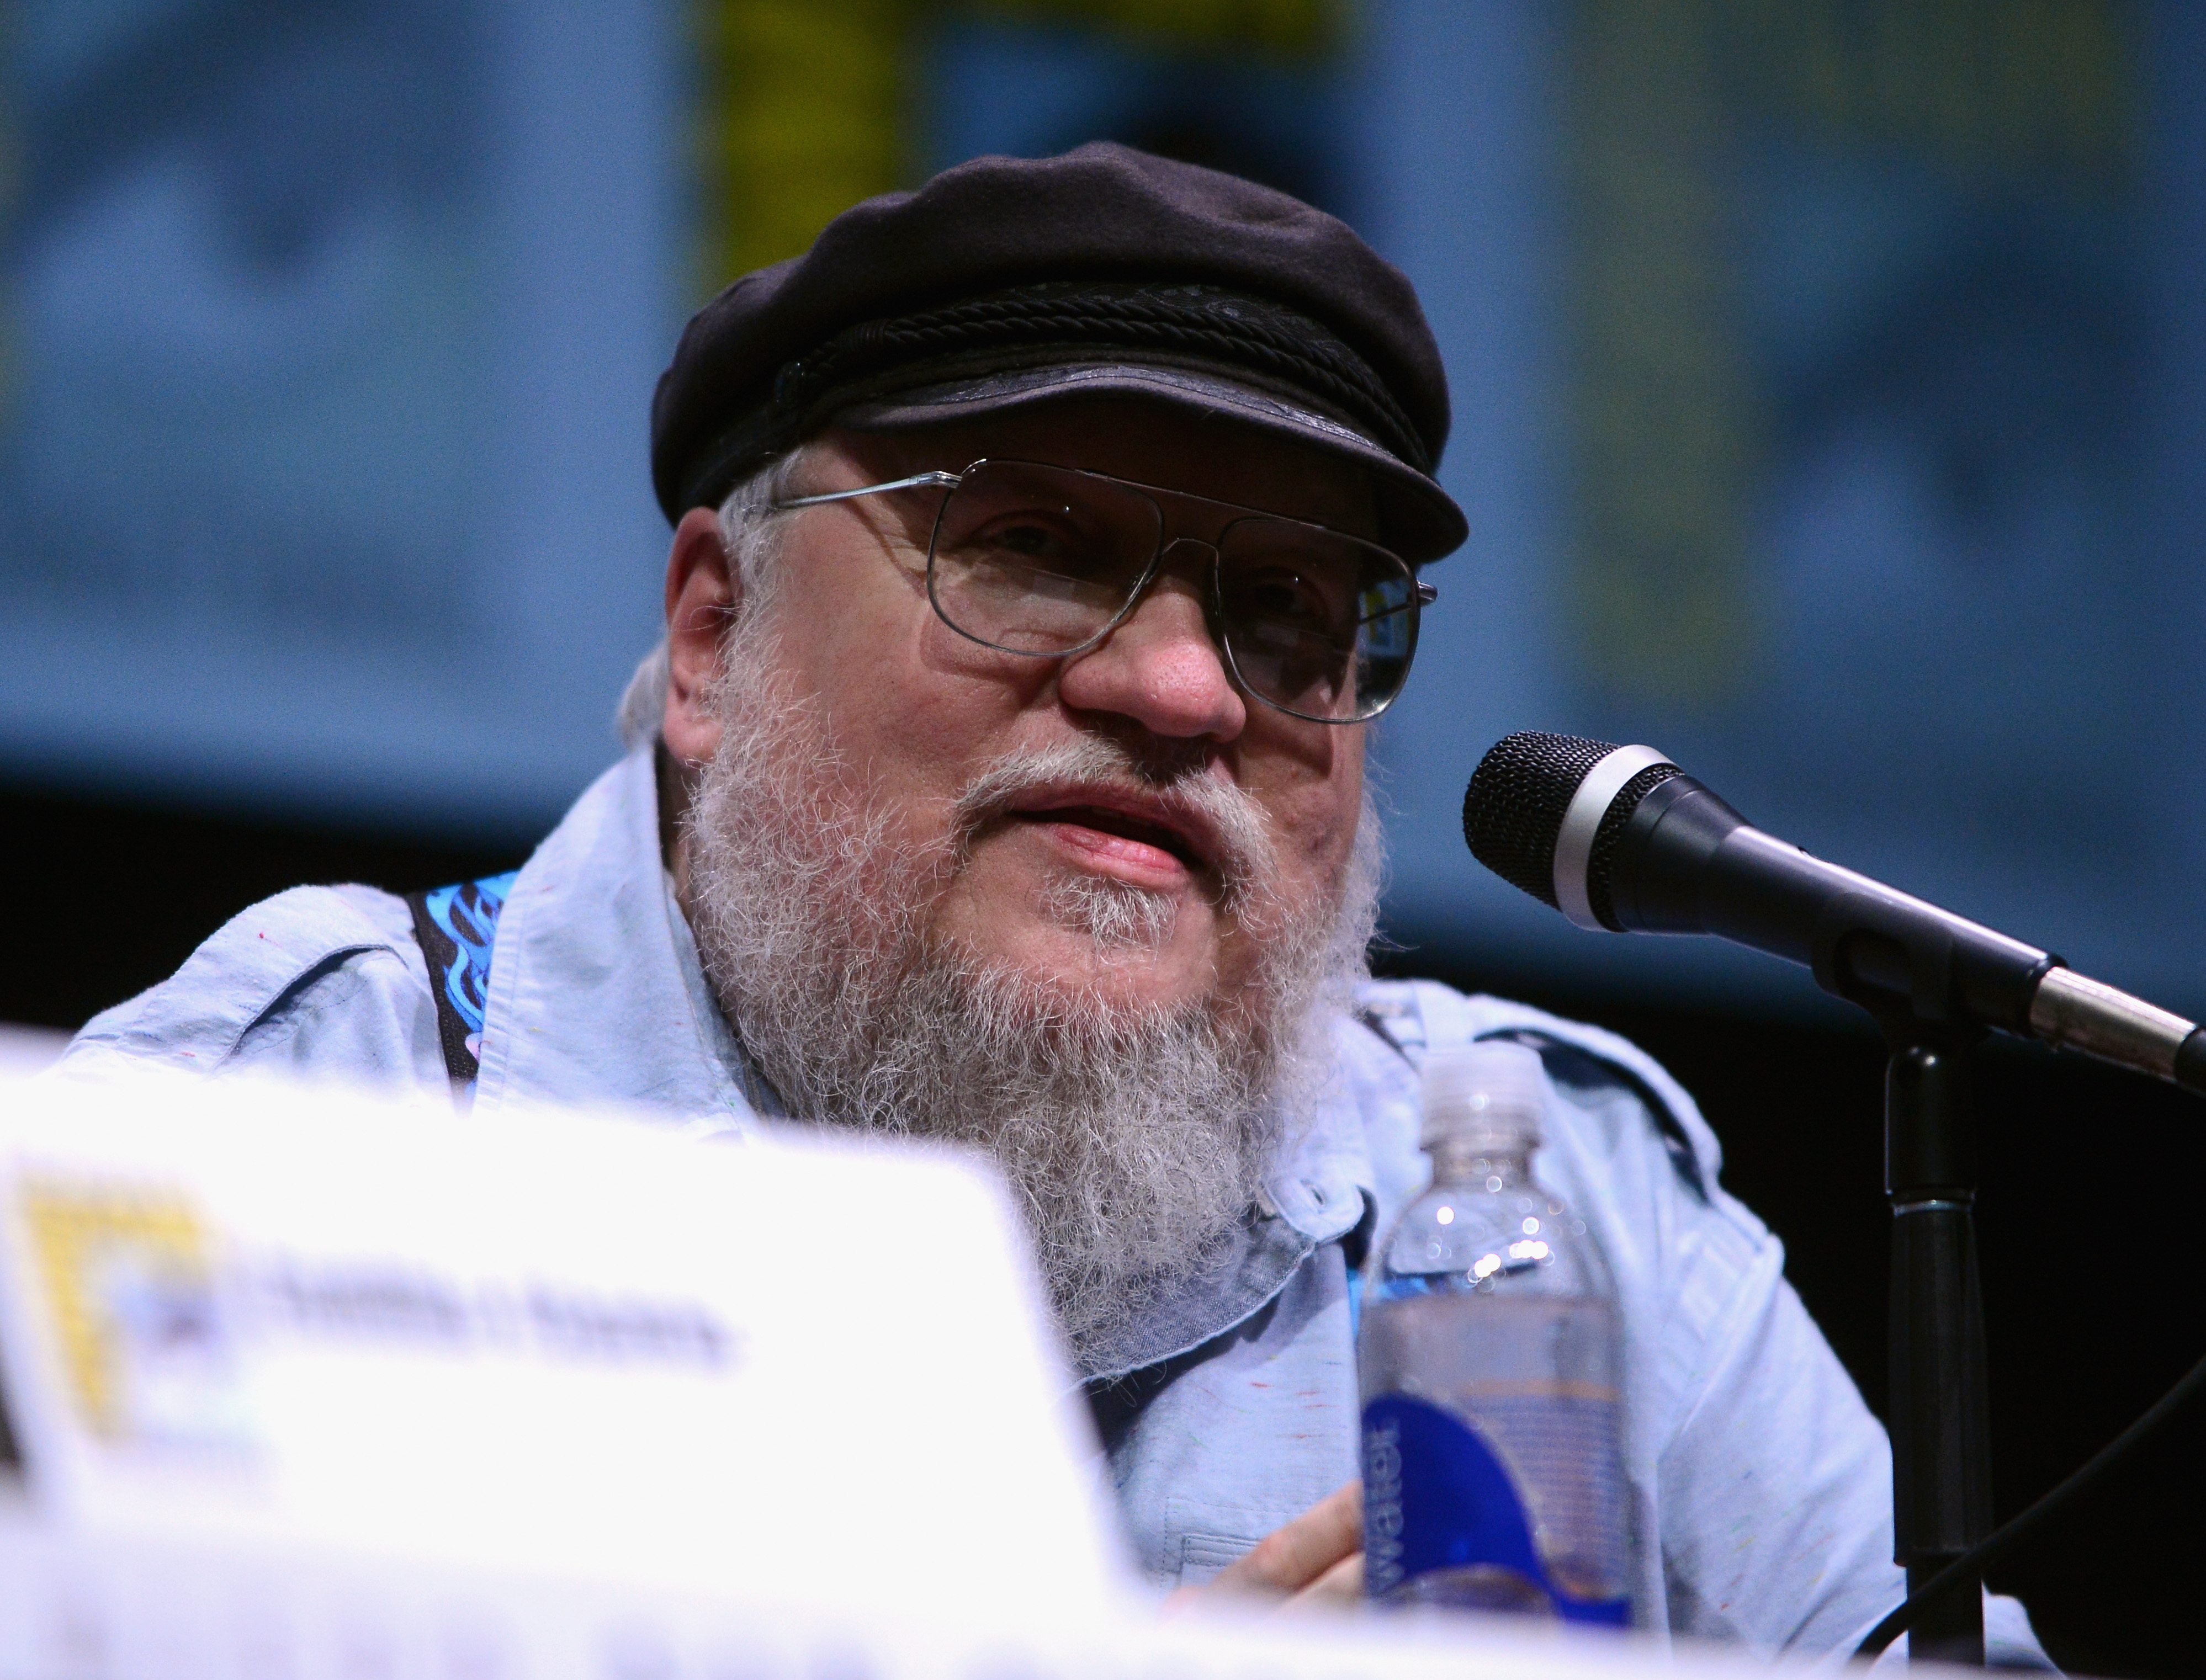 Game of Thrones author George RR Martin is offering fans a chance to be in his next novel for $20,000. (Albert L.—Getty Images)